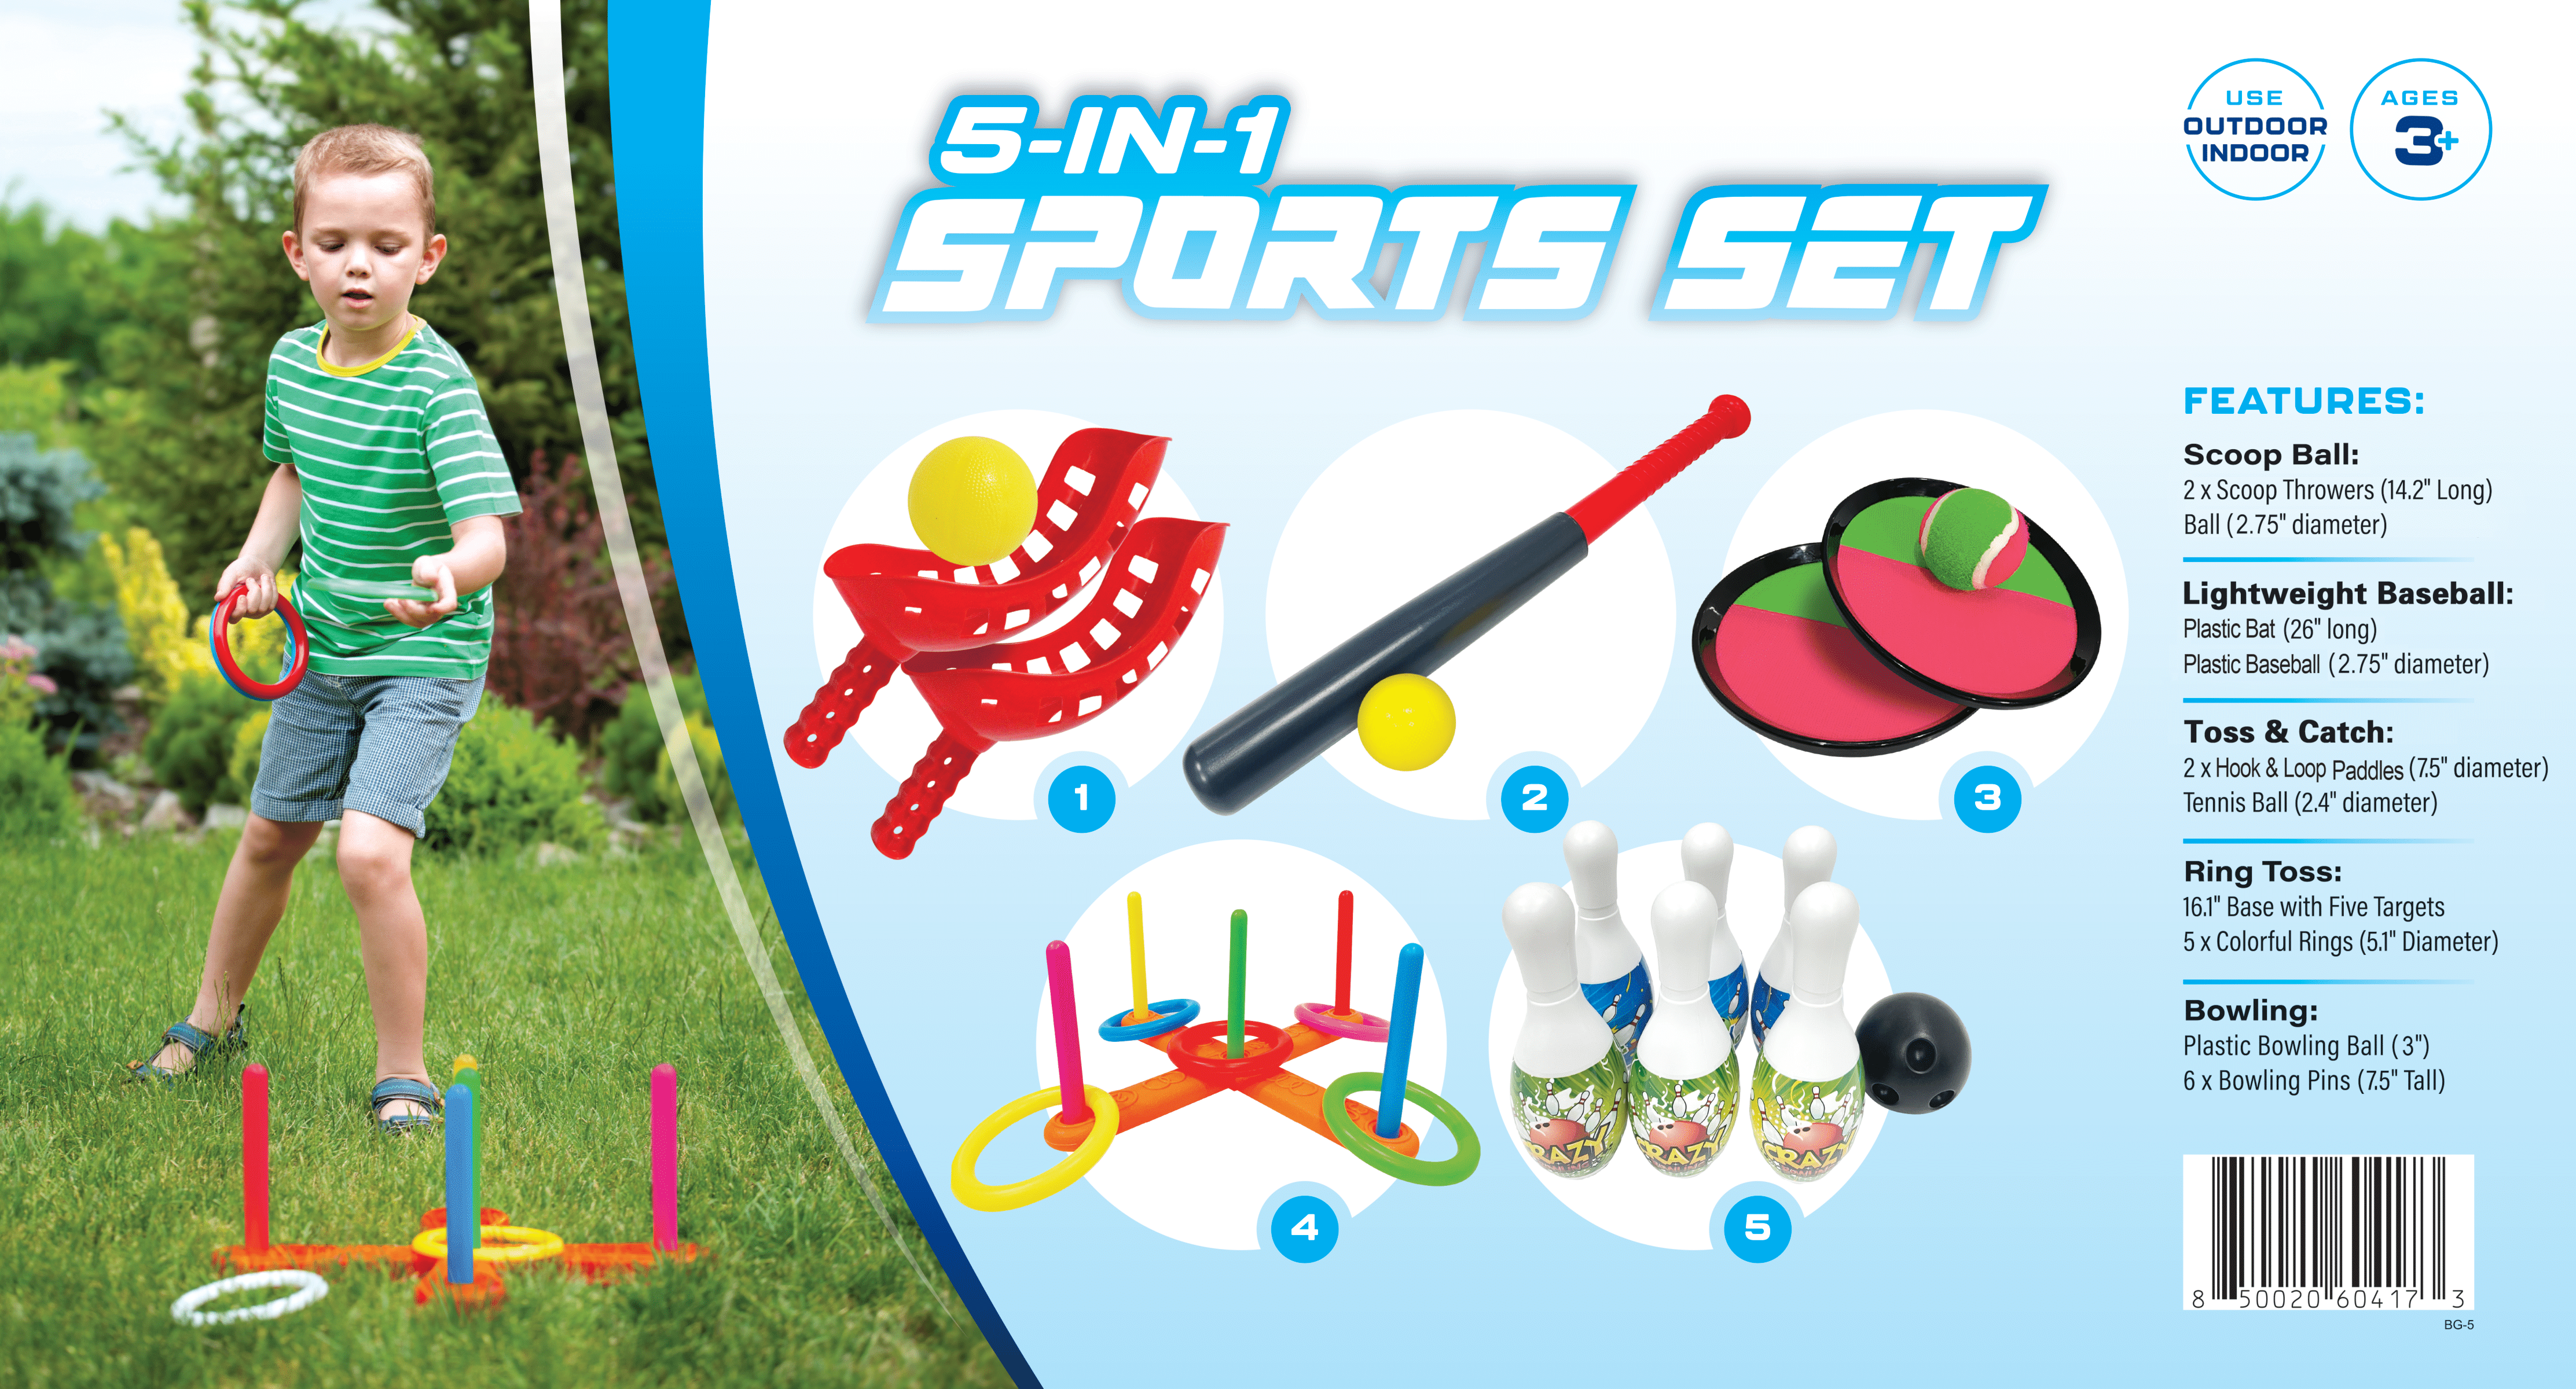 MinnARK 5-in-1 Sports Set, Family Games, Outdoor Yard Games, Beach Games, Jr. Sports - image 2 of 9